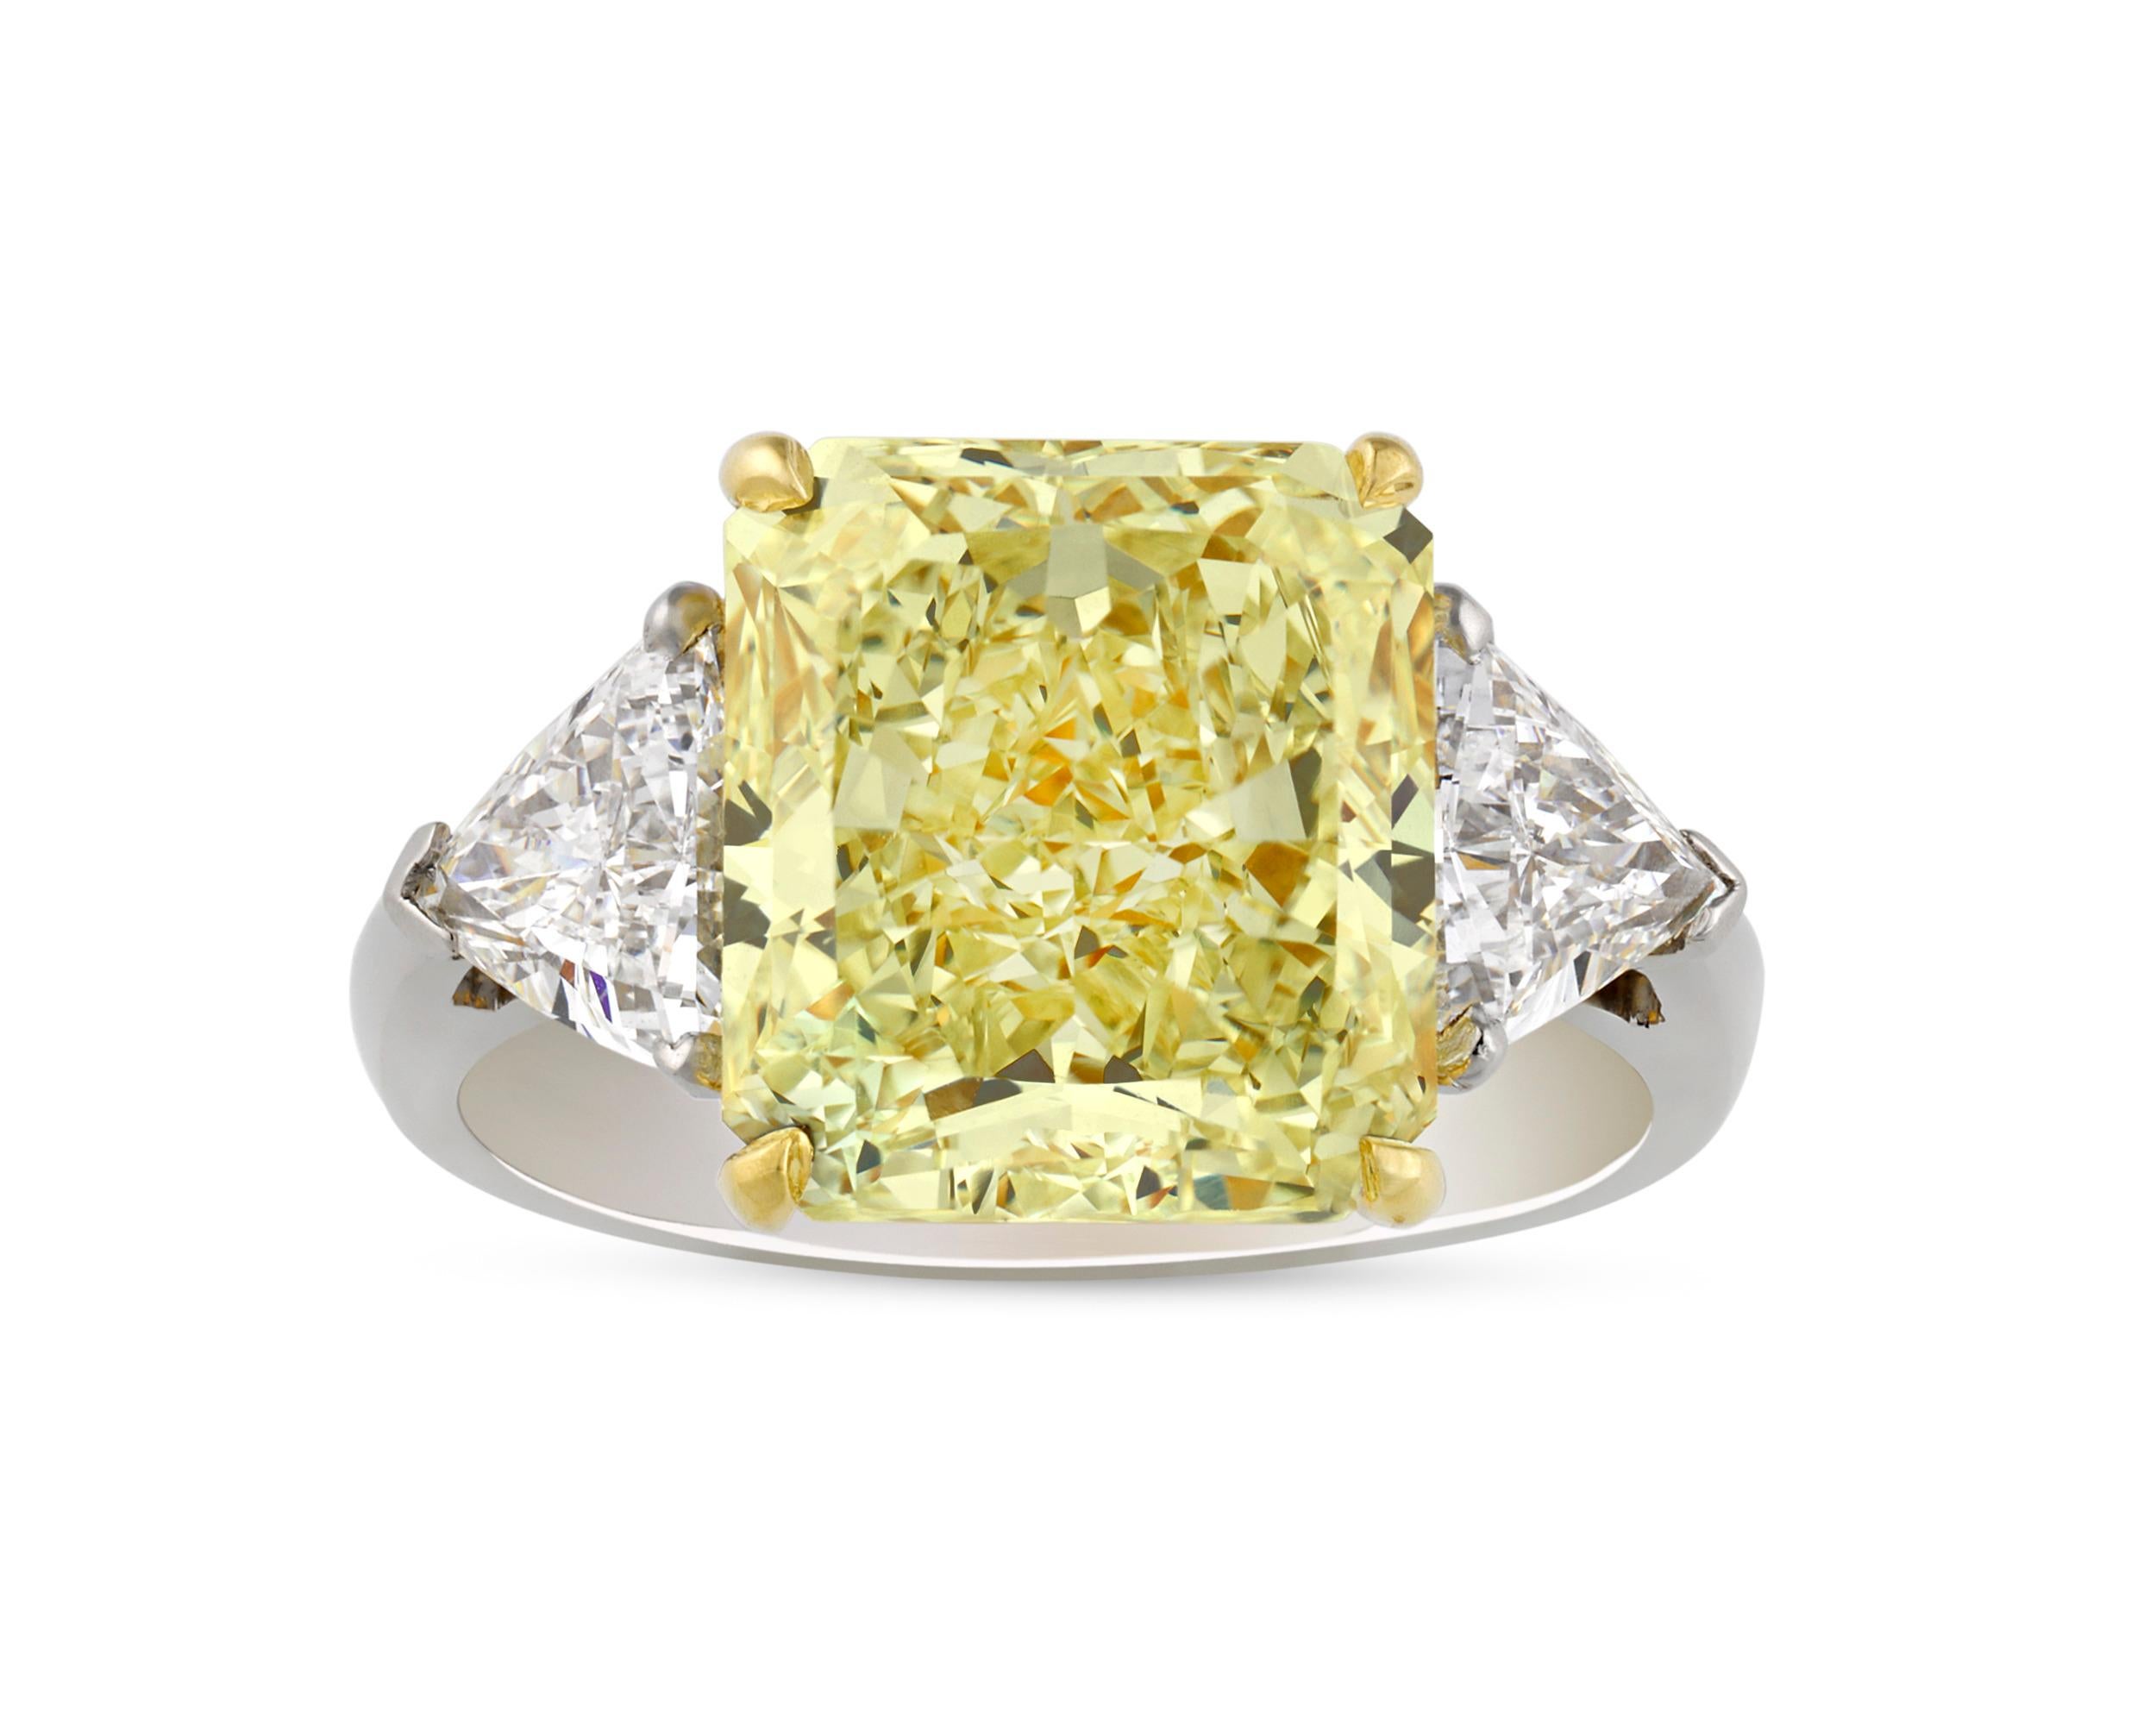 The spectacular, modified brilliant-cut natural fancy yellow diamond in this ring totals 6.42 carats. Yellow diamonds are among the most coveted gemstones in the world, and this is a truly exceptional example of their beauty. The diamond is